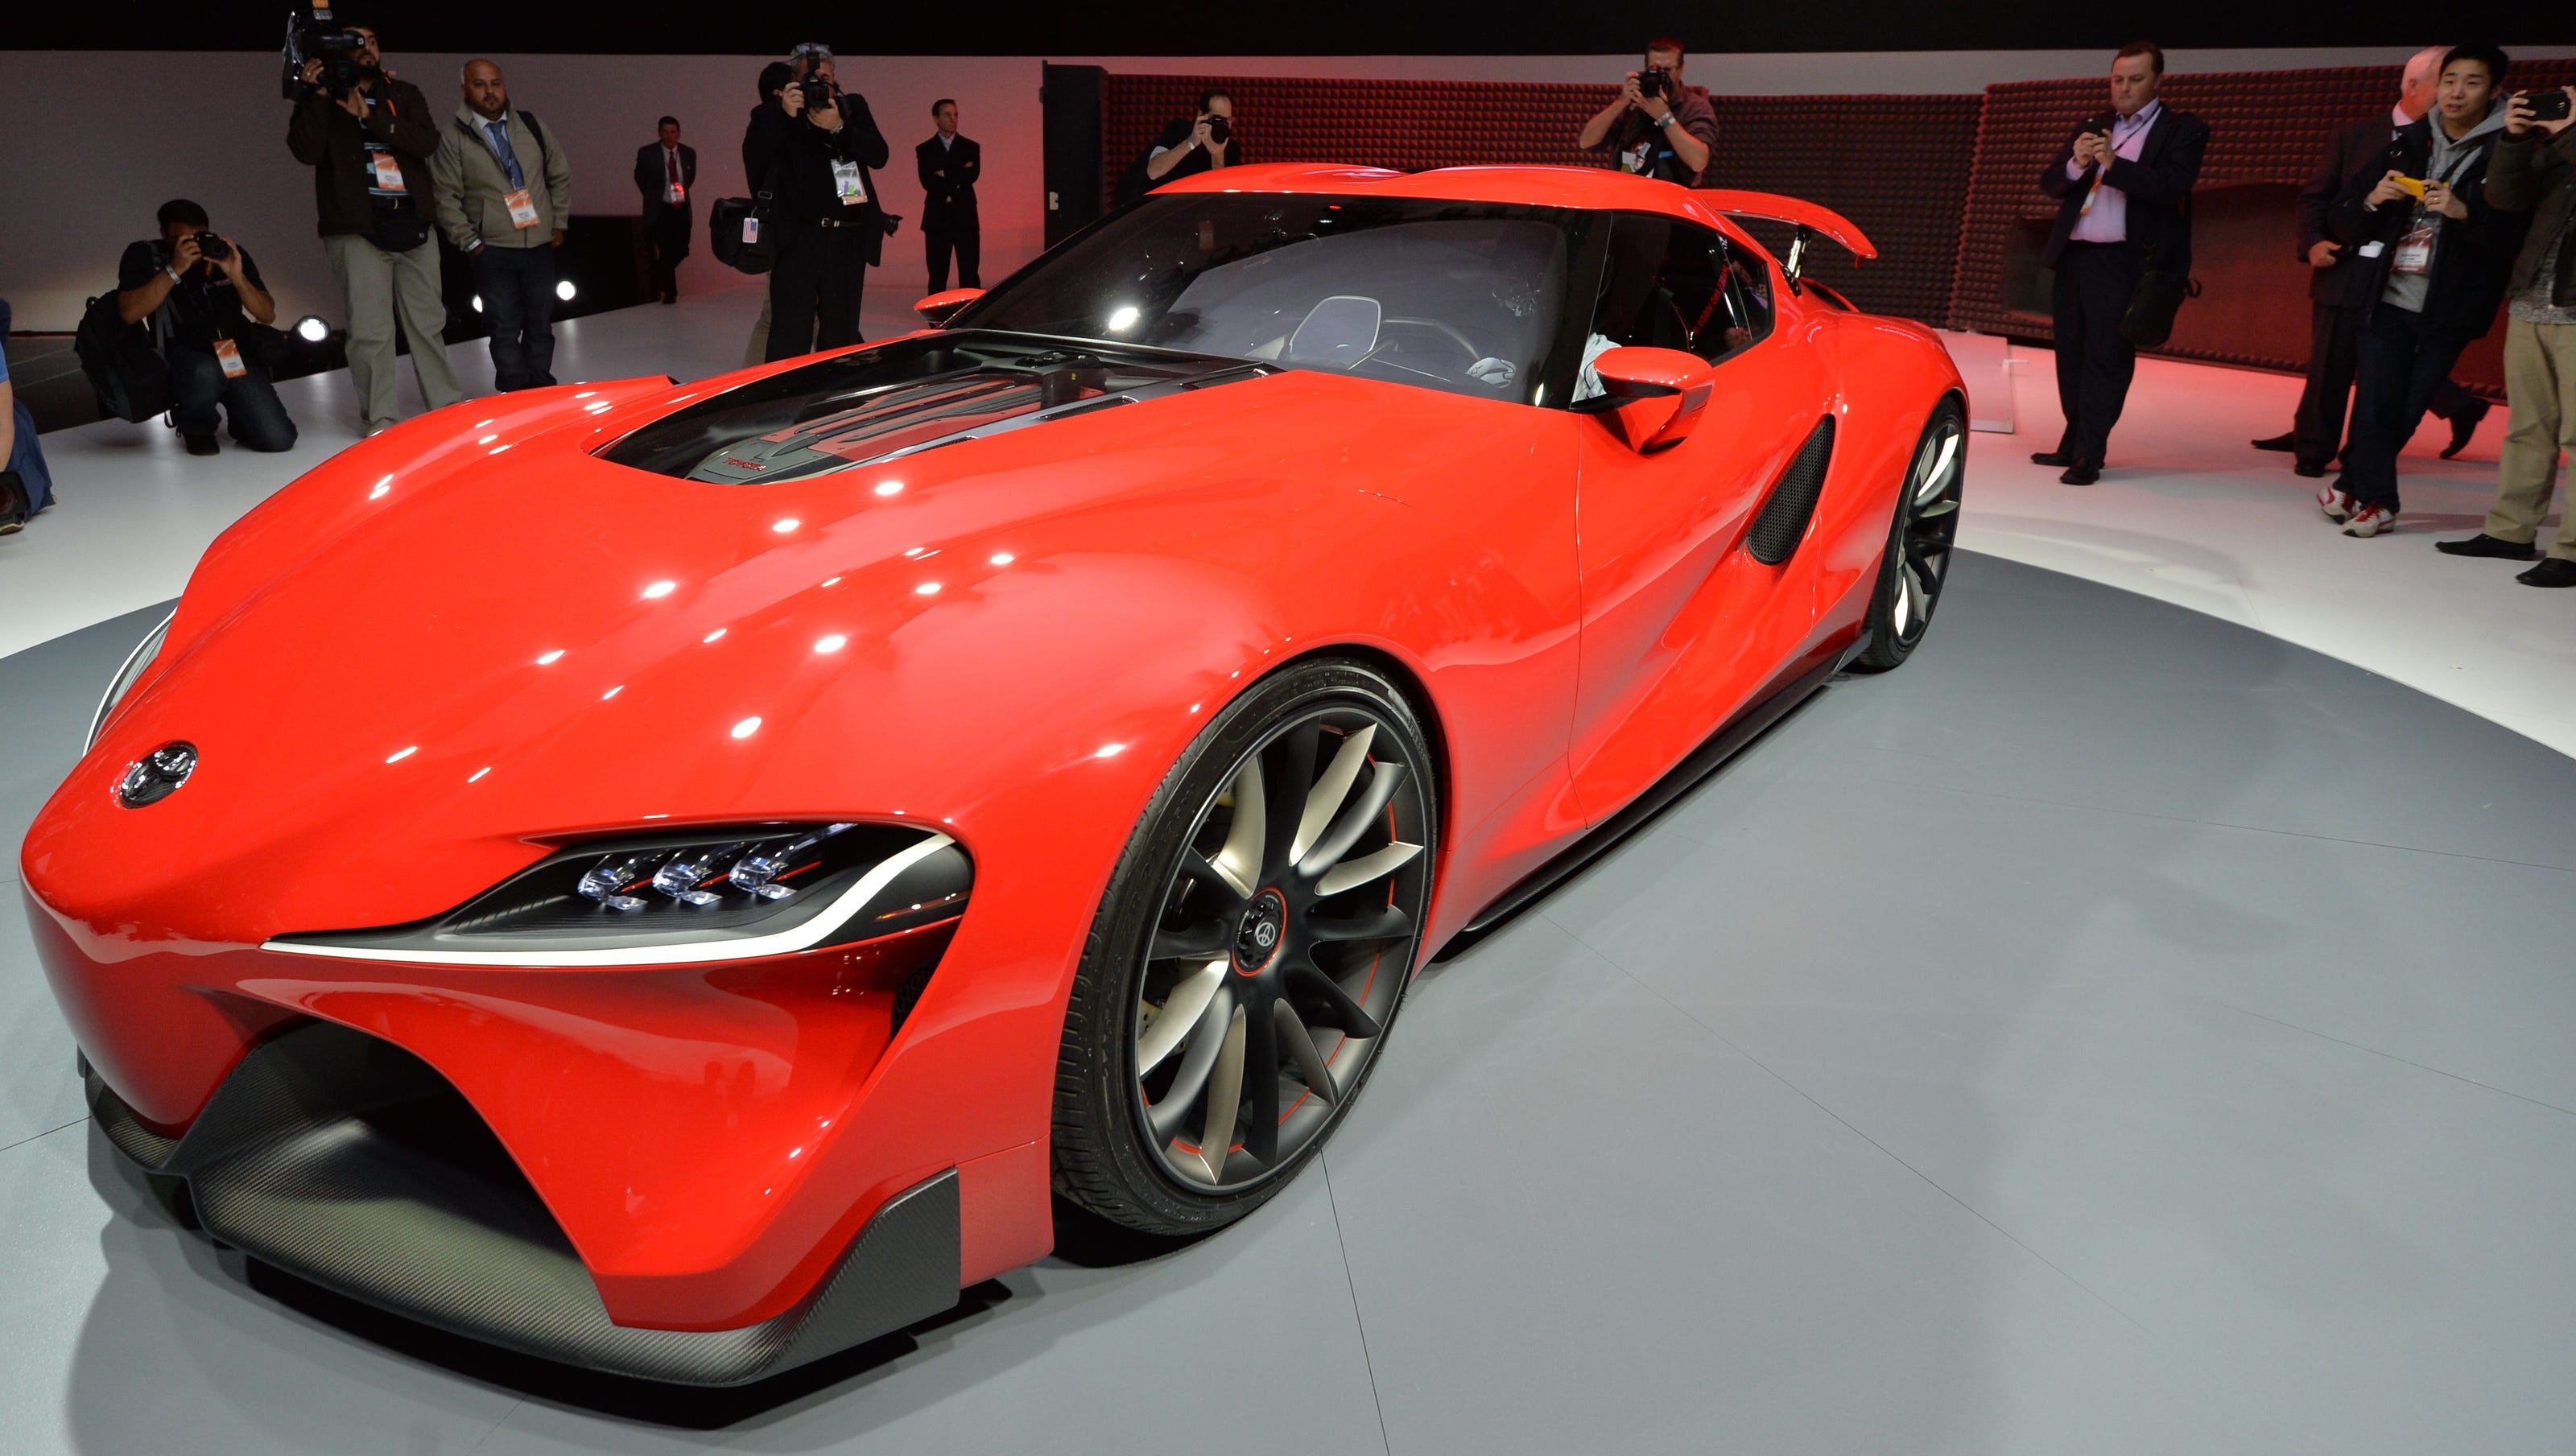 Toyota's FT1 sports car concept points to future